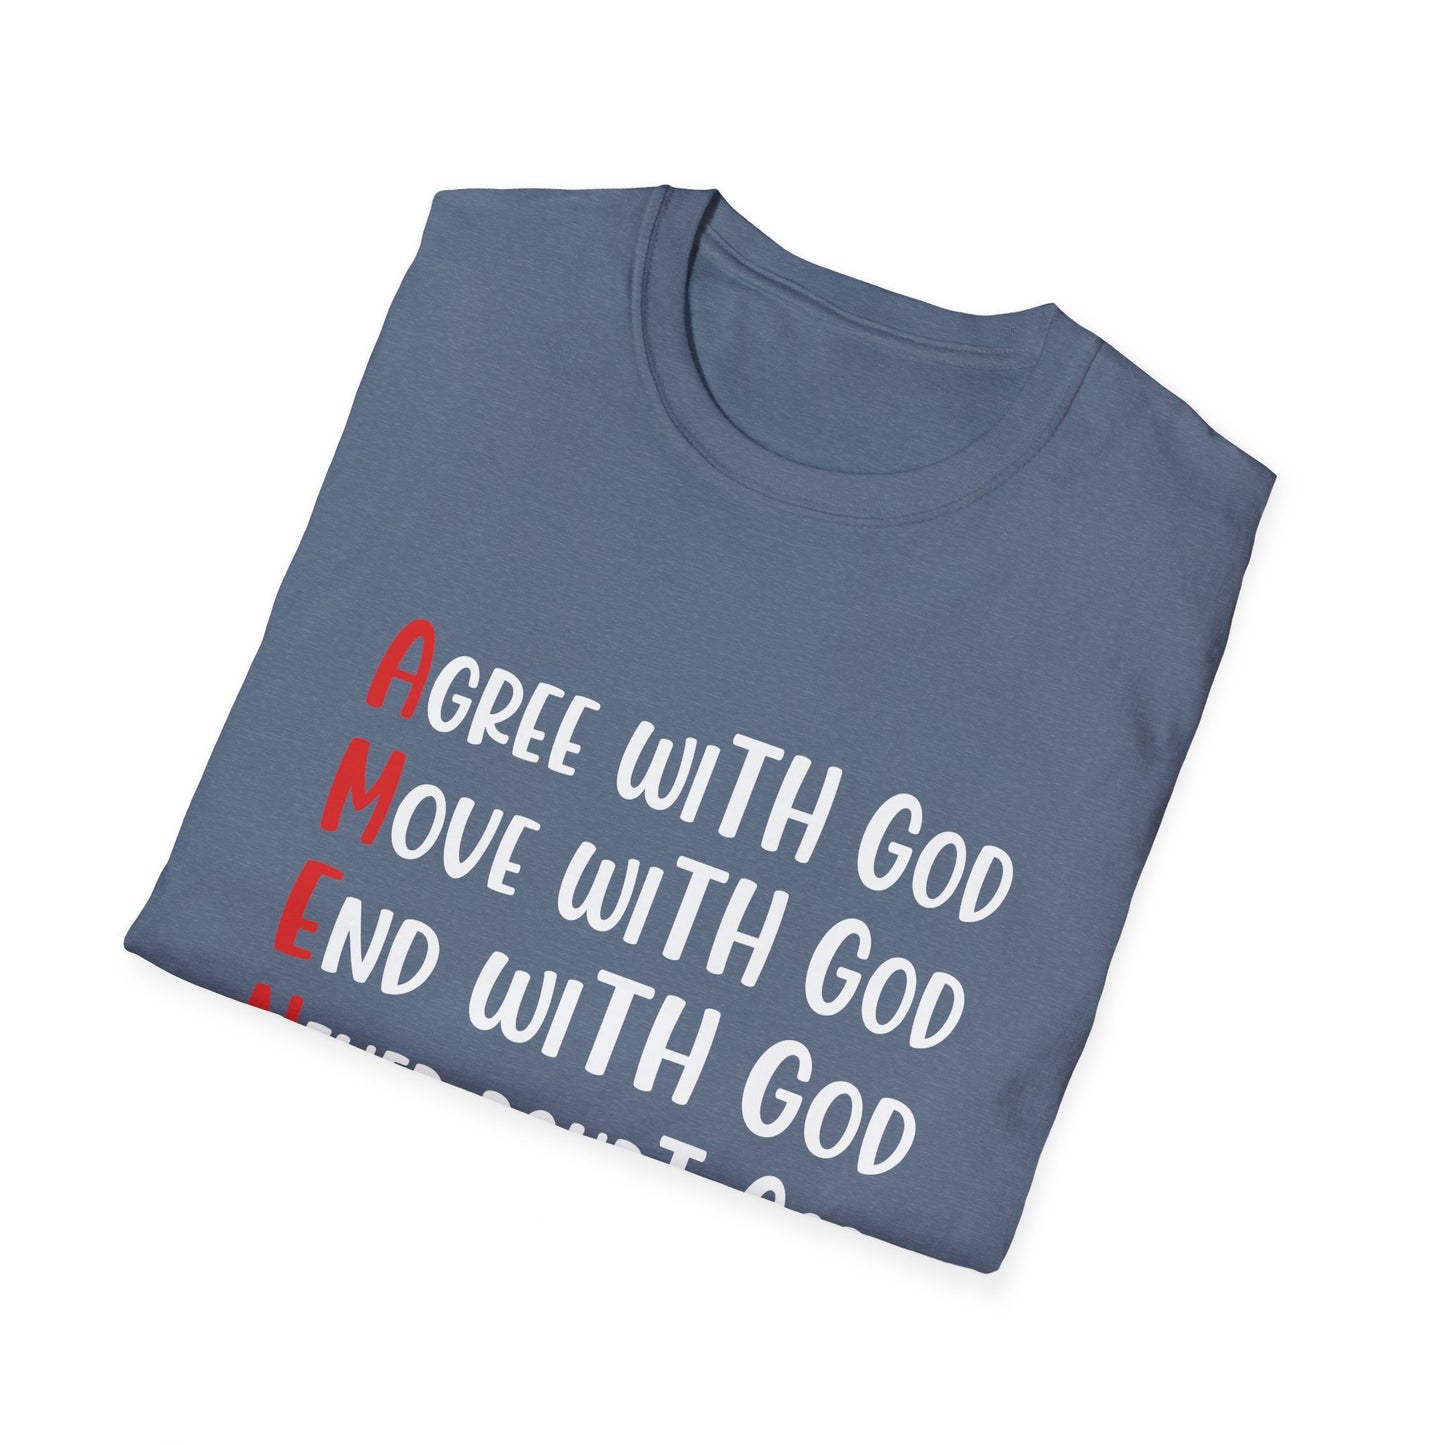 AMEN Agree, Move, End With God Never Doubt God  Unisex Christian T-shirt